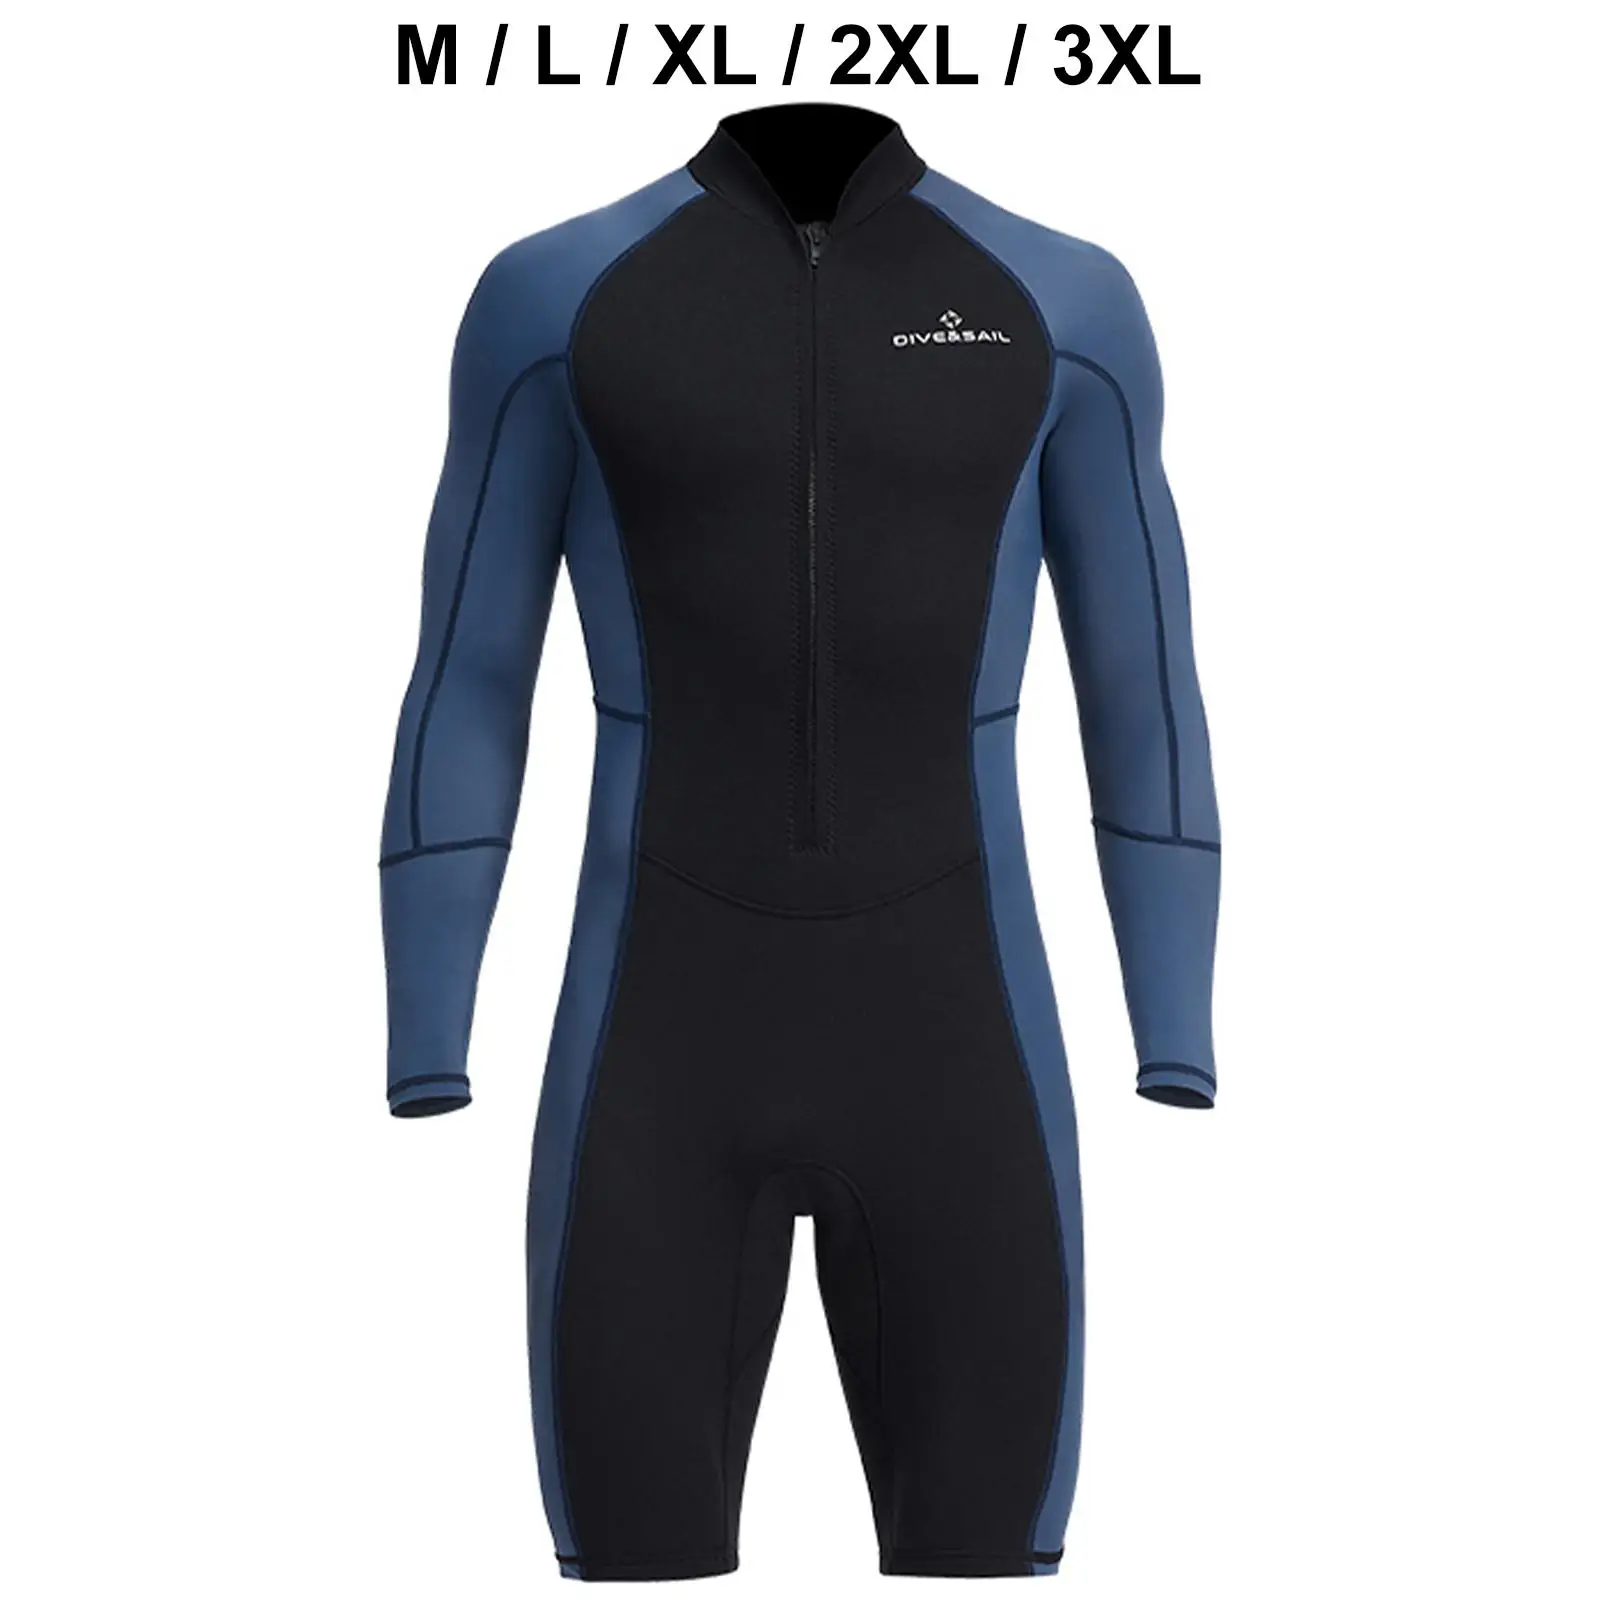 Mens Wetsuit 1.5mm Neoprene Surf Suit Full Body Shorty Wetsuit for Men Long Sleeve Front Zip Diving Suits for Swimming